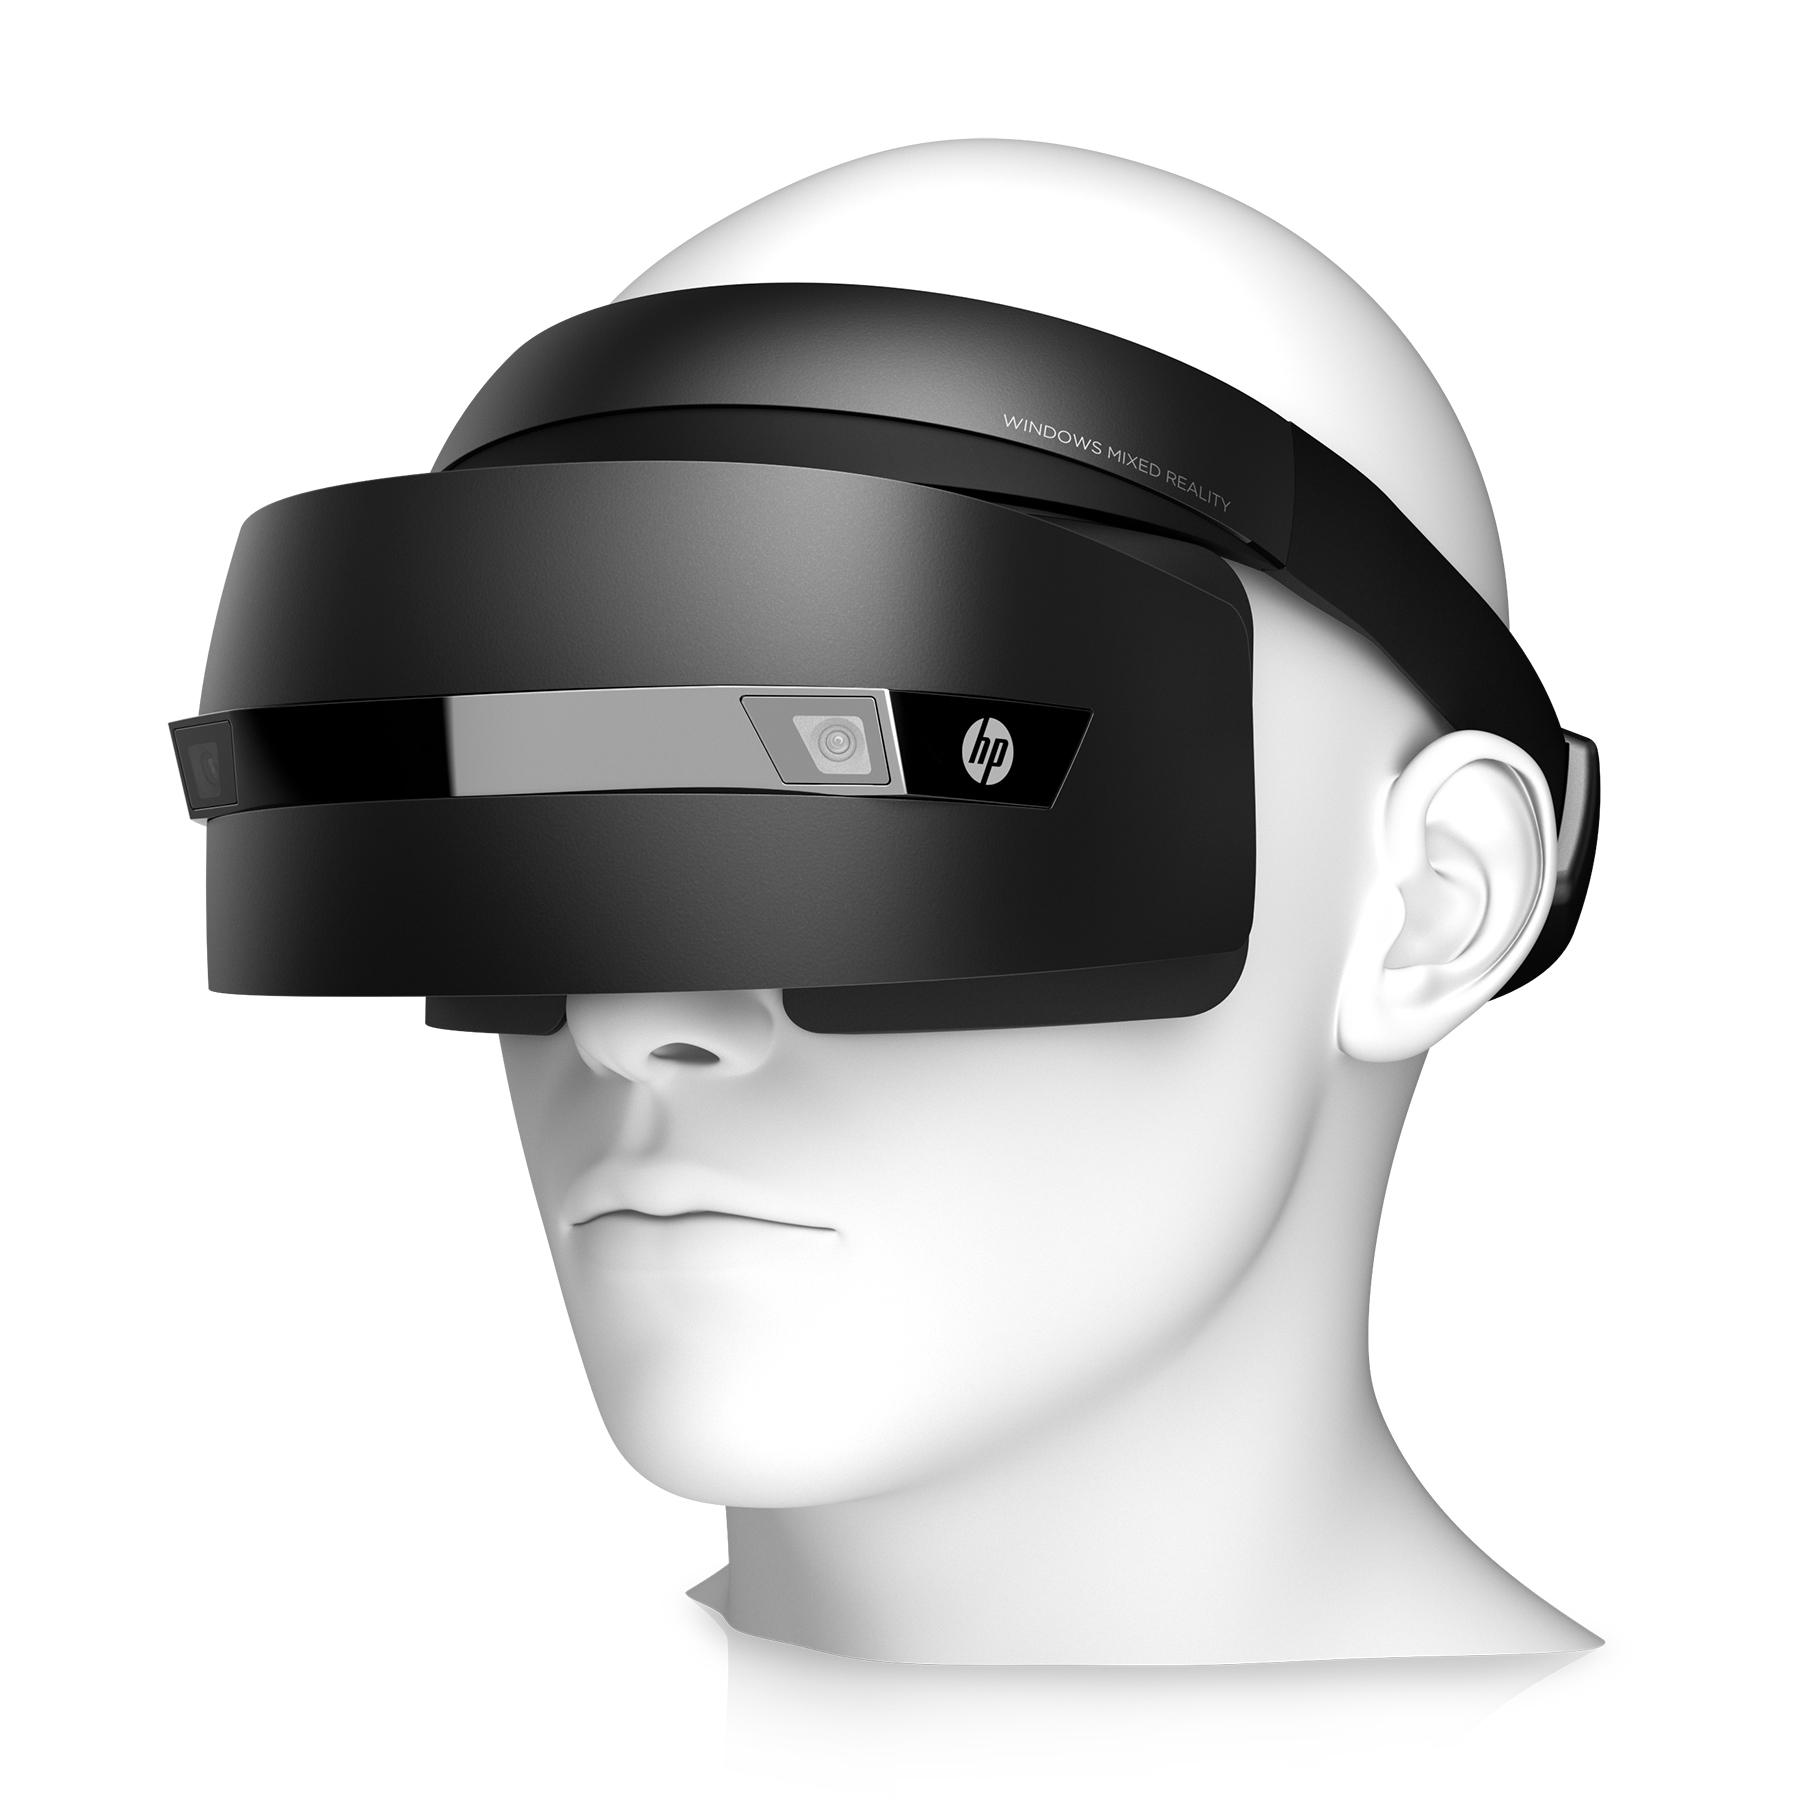 Logisk hed omhyggeligt VR очки HP Windows Mixed Reality Headset